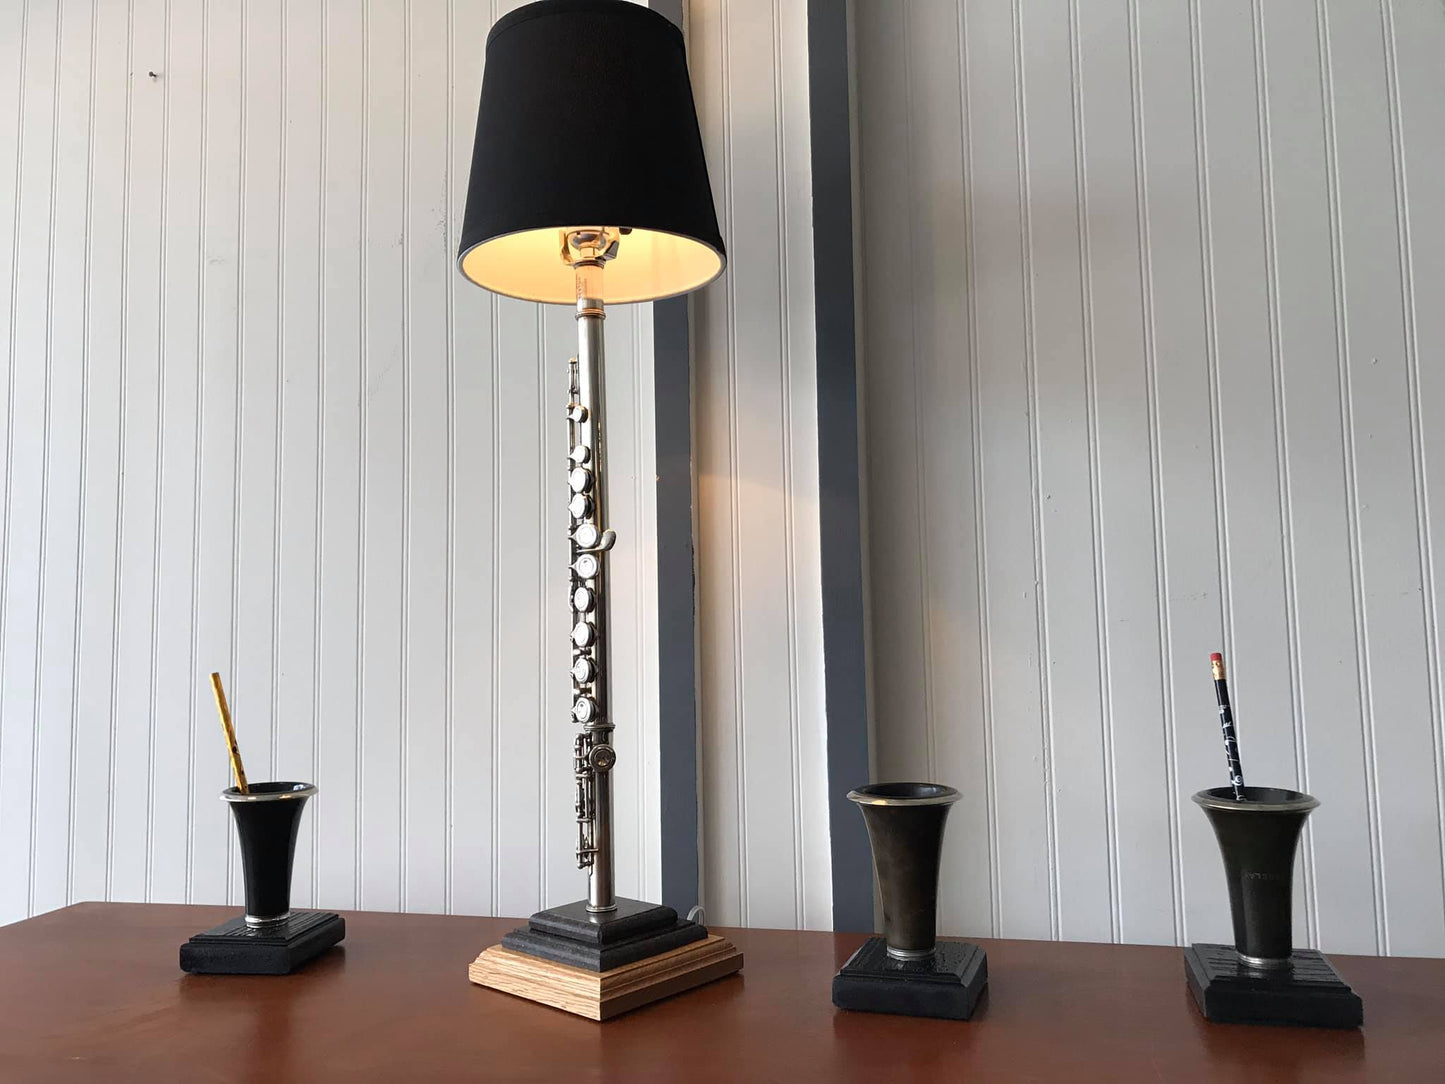 Flute Lamp with shade